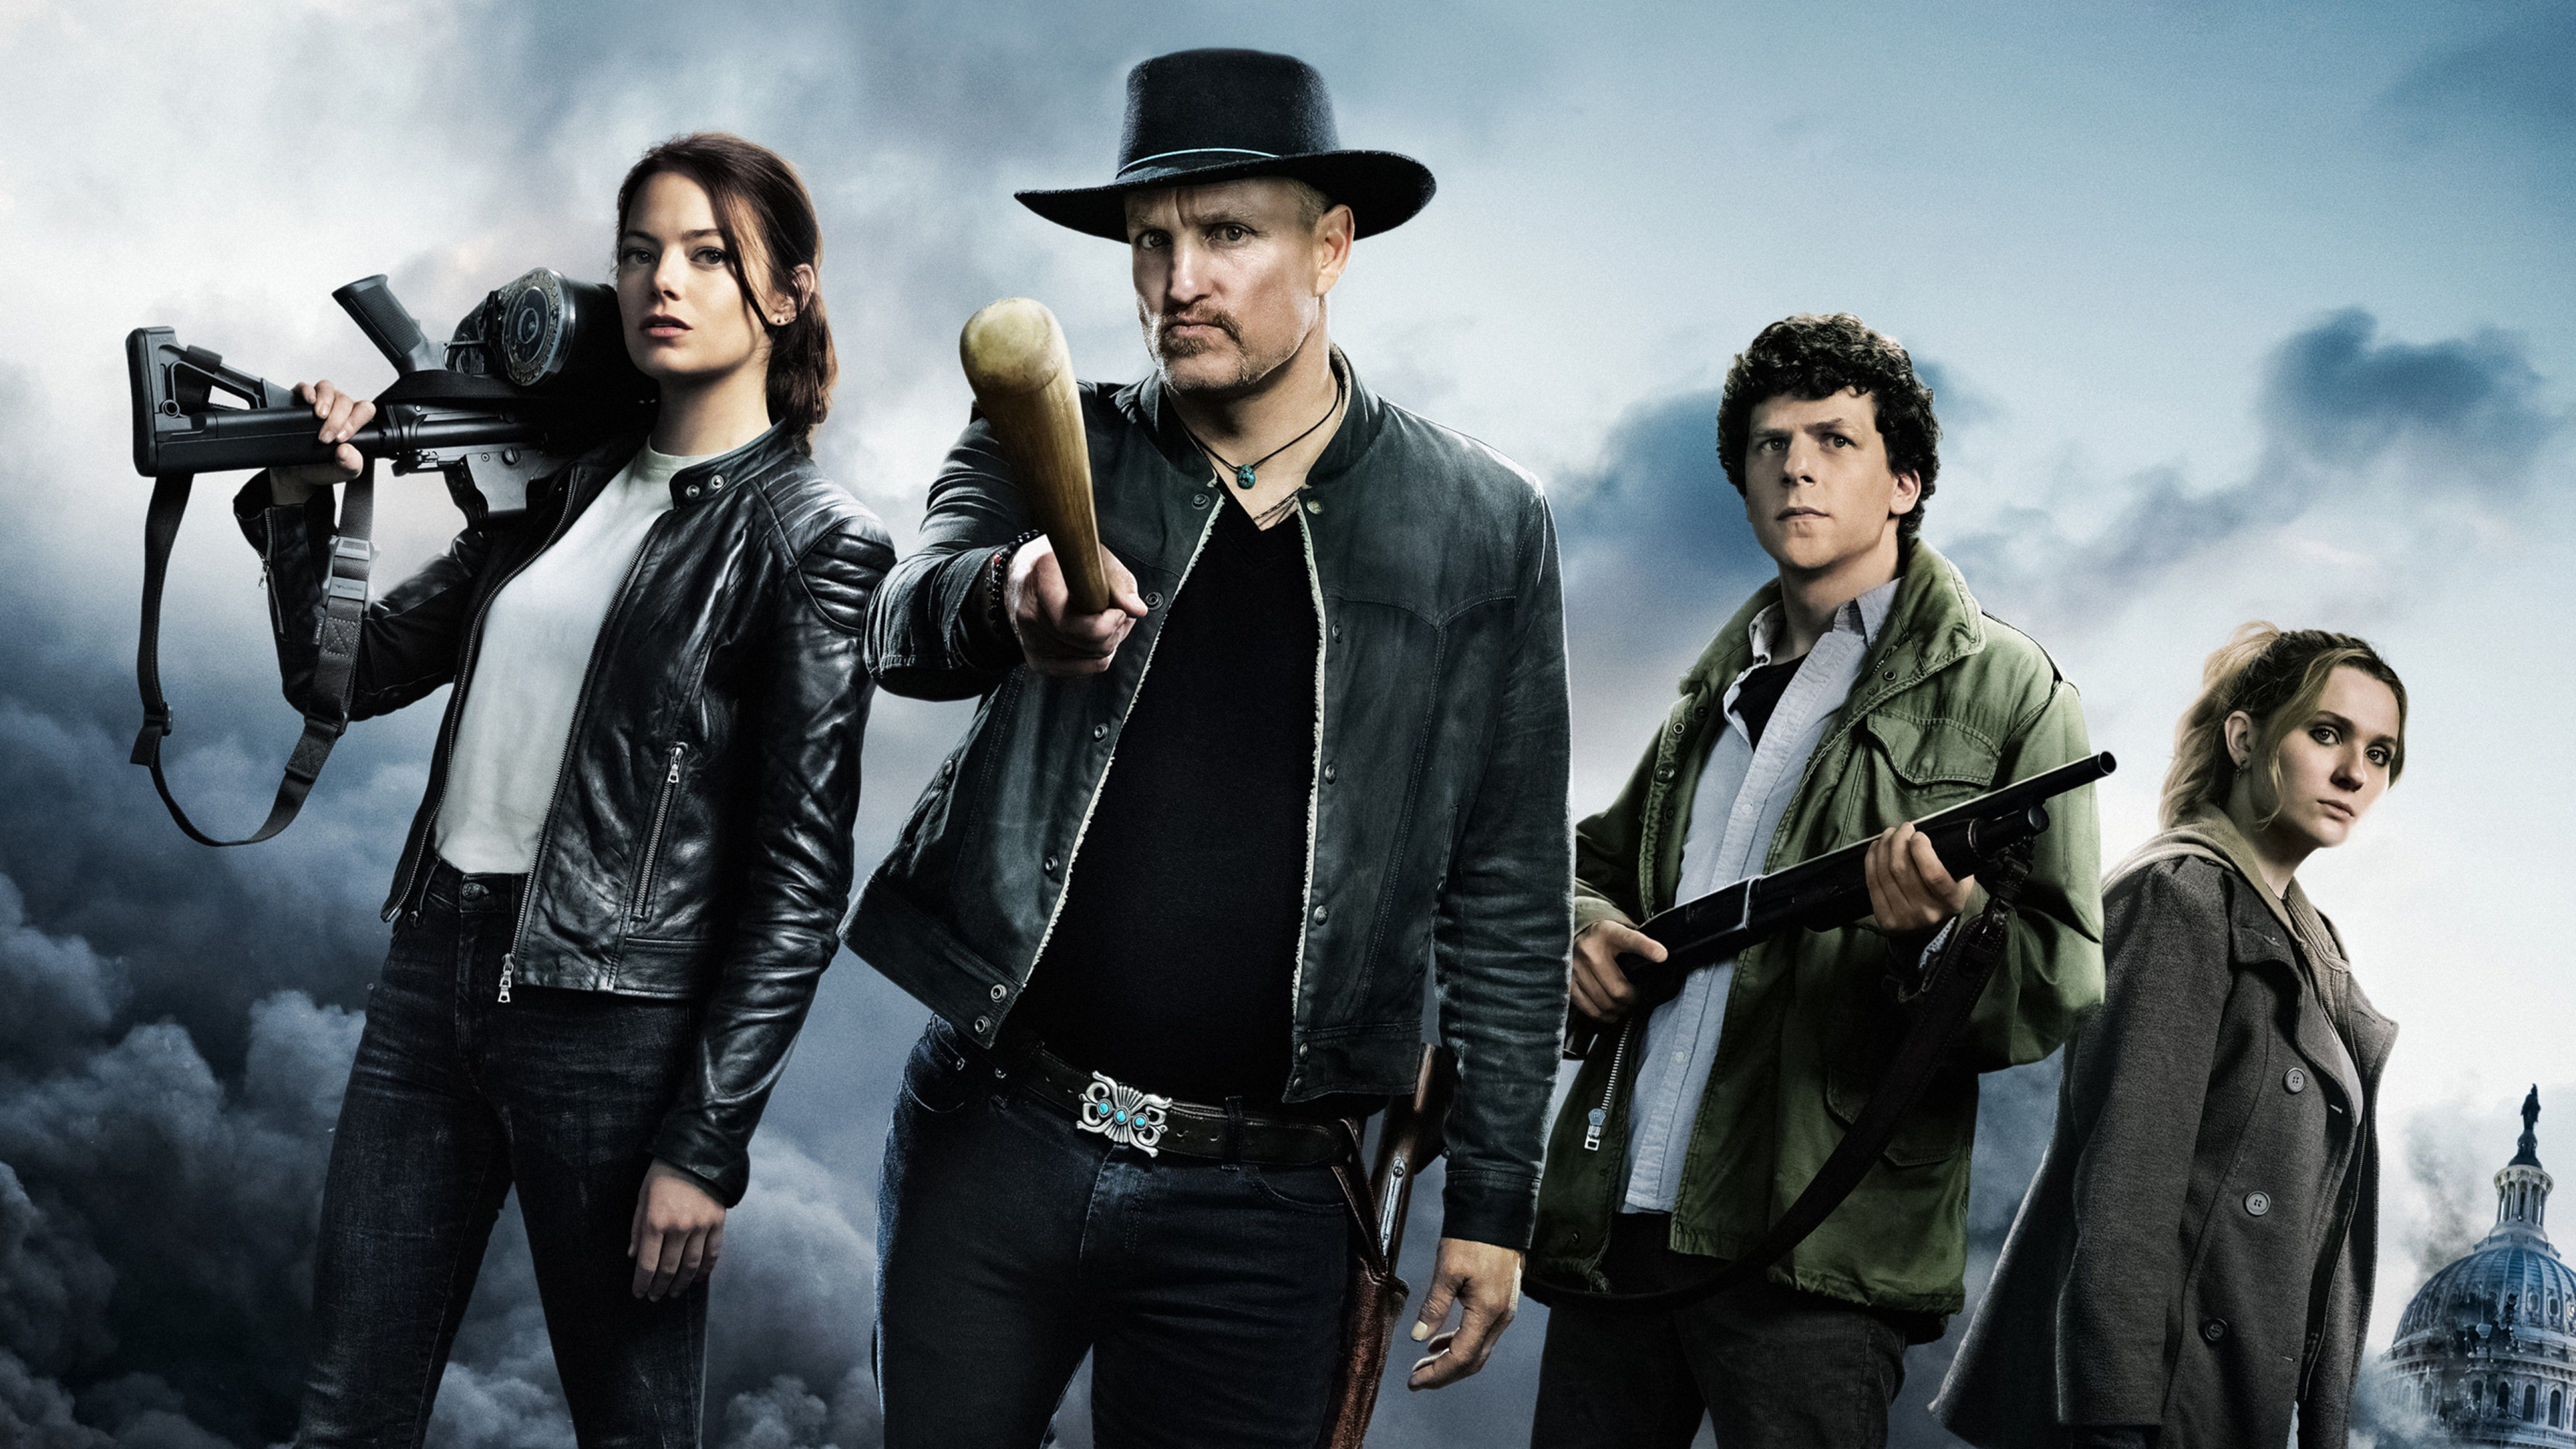 Zombieland Movie Wallpapers